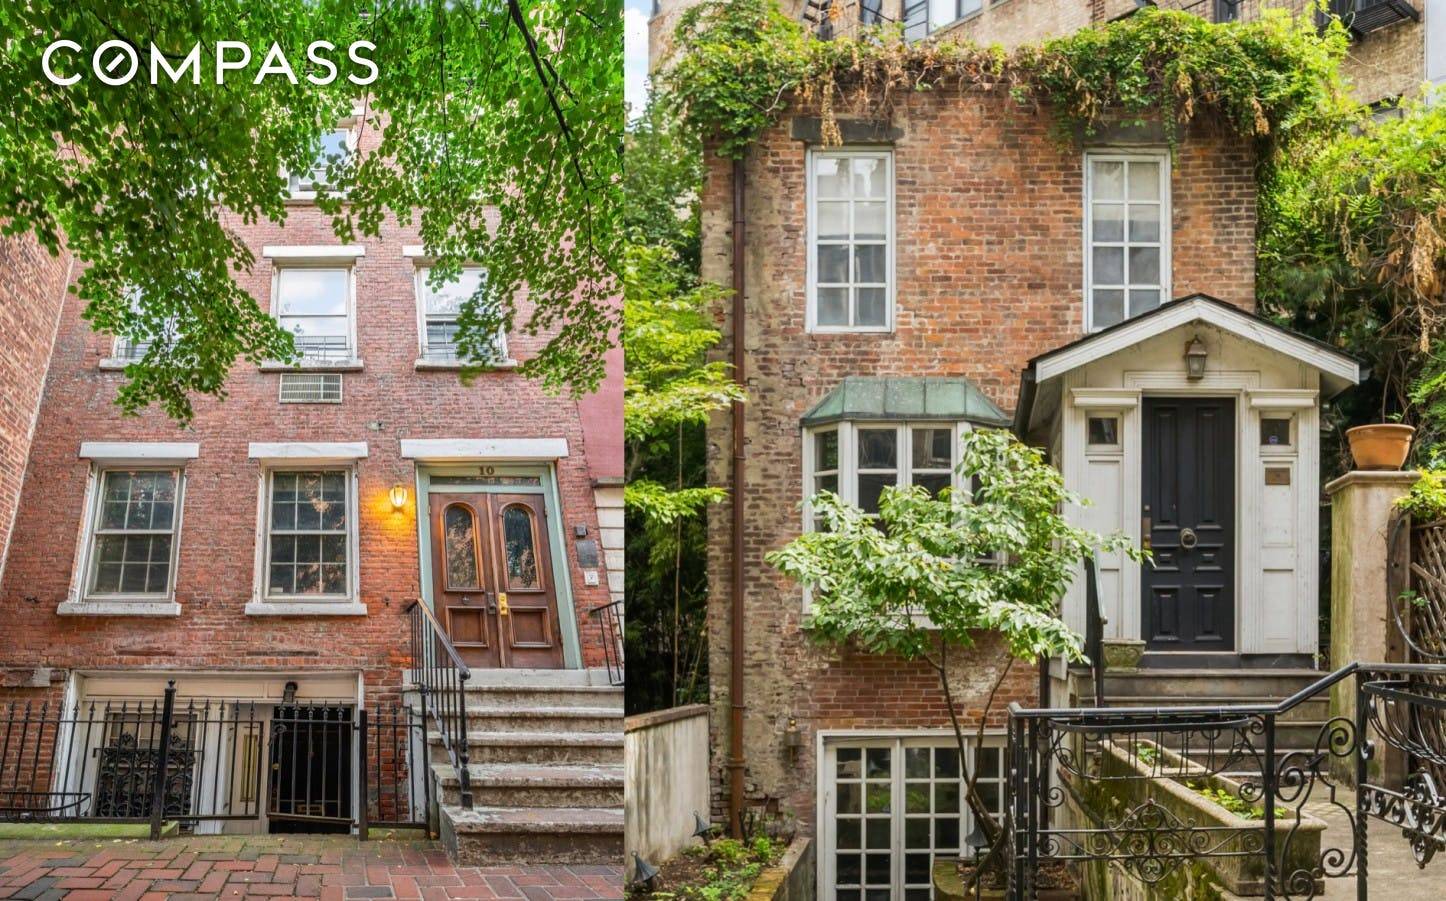 TOWNHOUSE WITH GARDEN amp ; CARRIAGE HOUSE 10 Bedford Street offers a special and rare opportunity to restore an approx 19 7 wide X 35 3 deep 1830 townhouse on ...